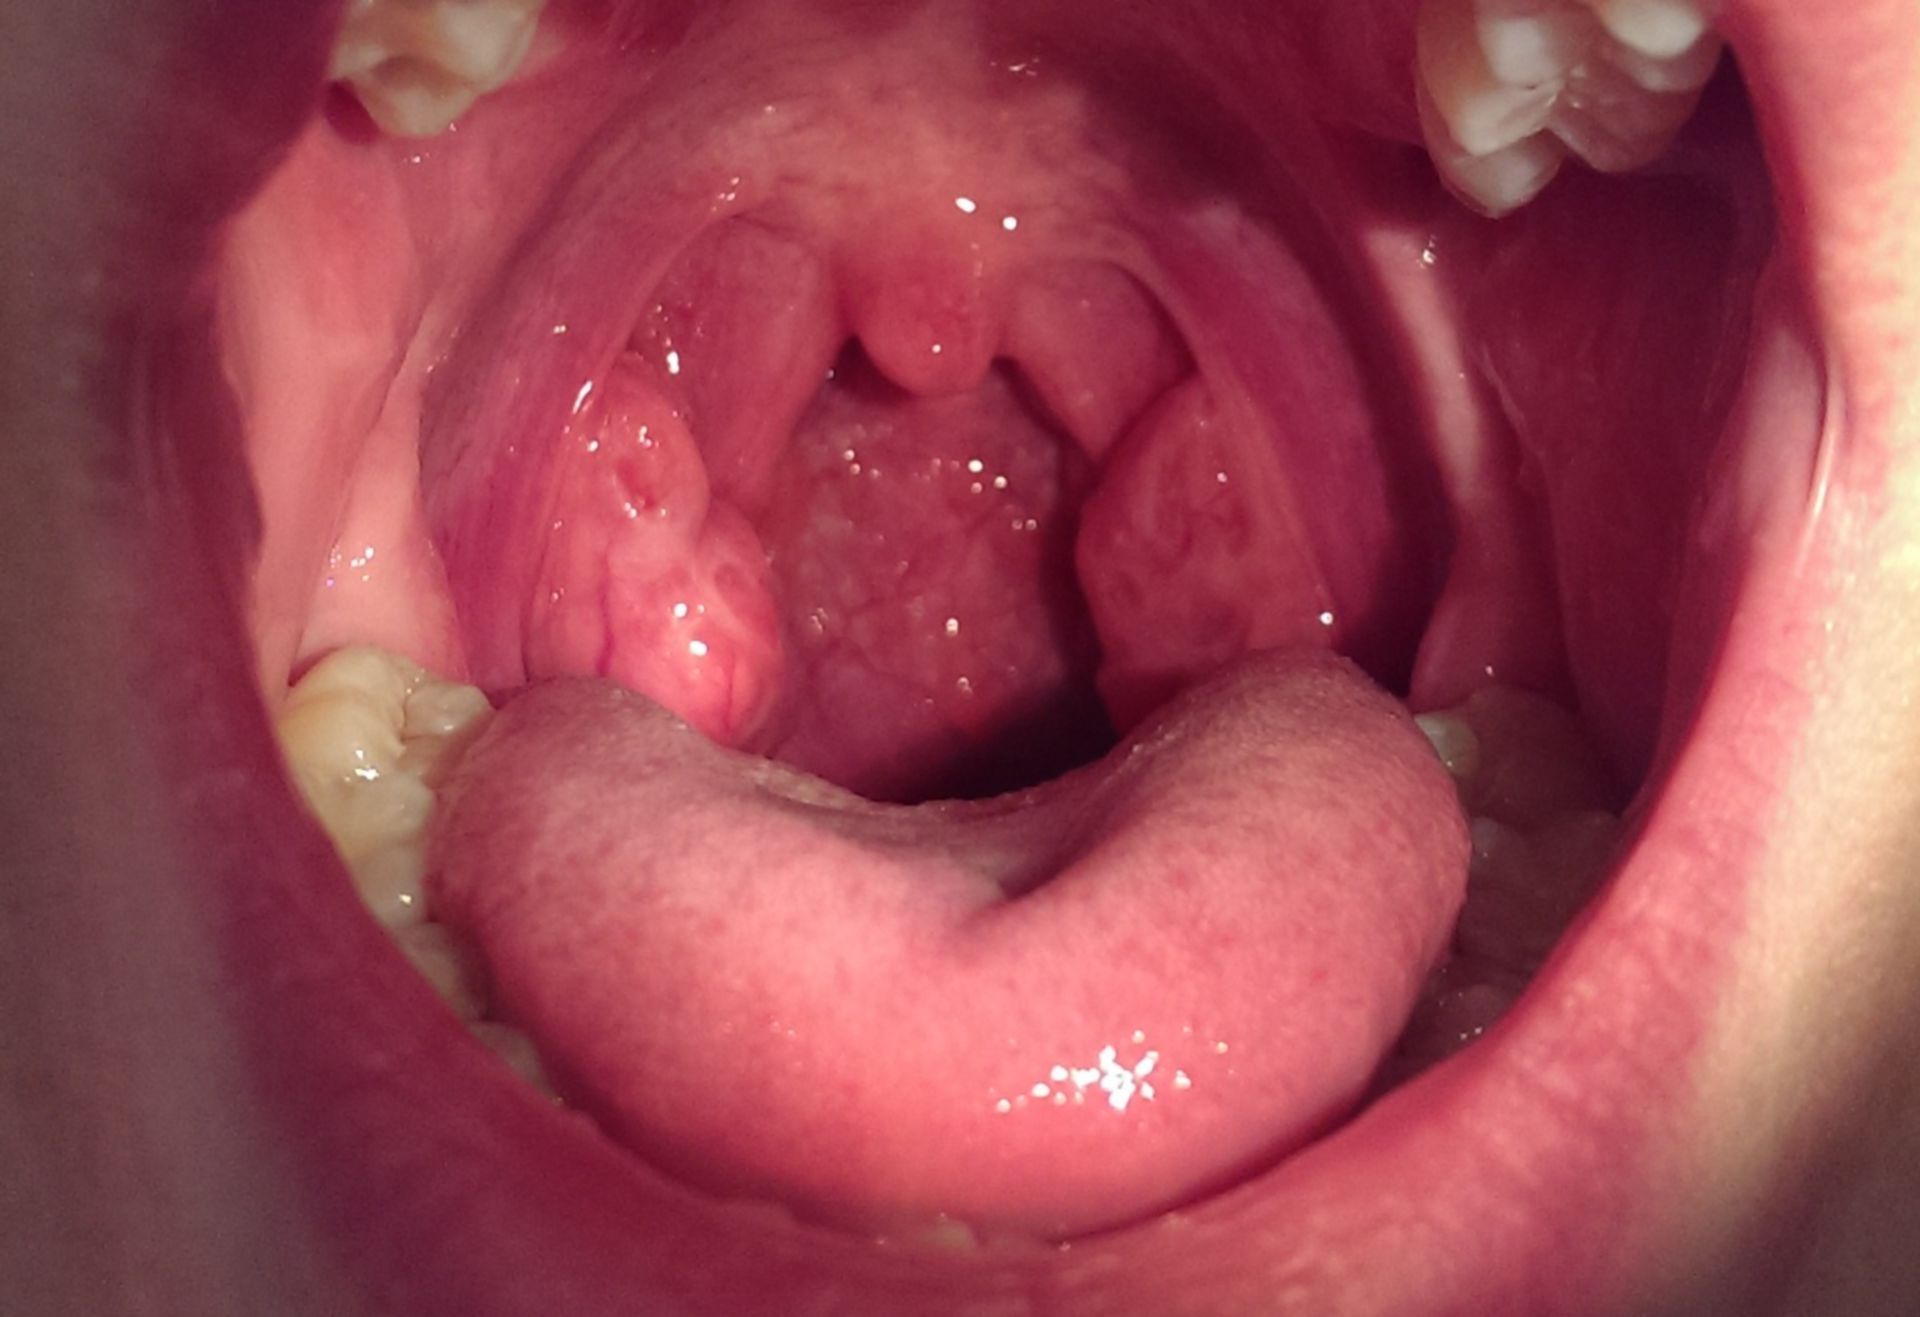 Hyperplasia of the tonsils